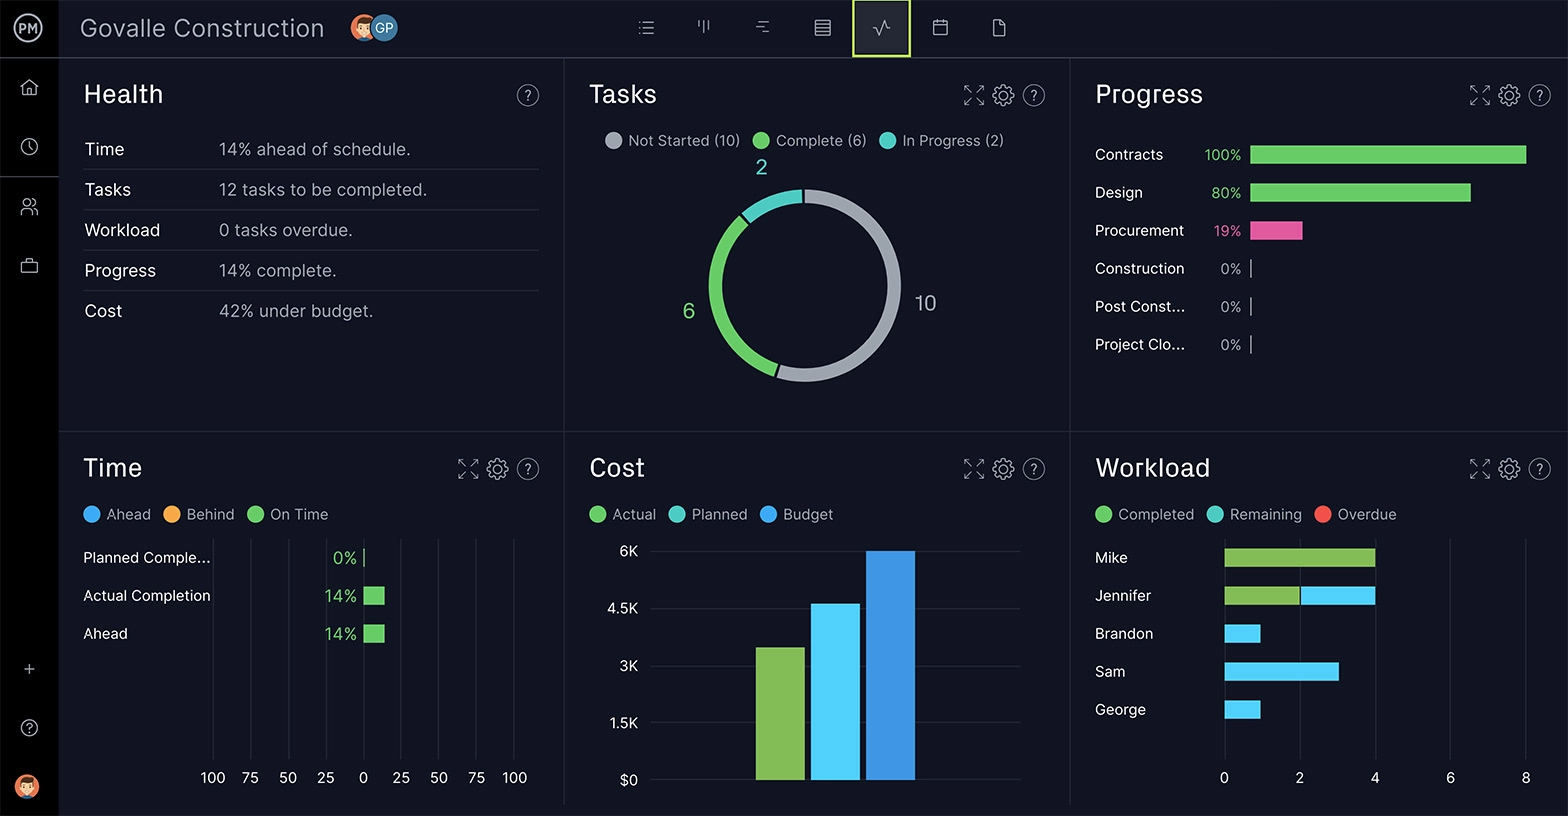 ProjectManager's dashboard that shows six key project metrics